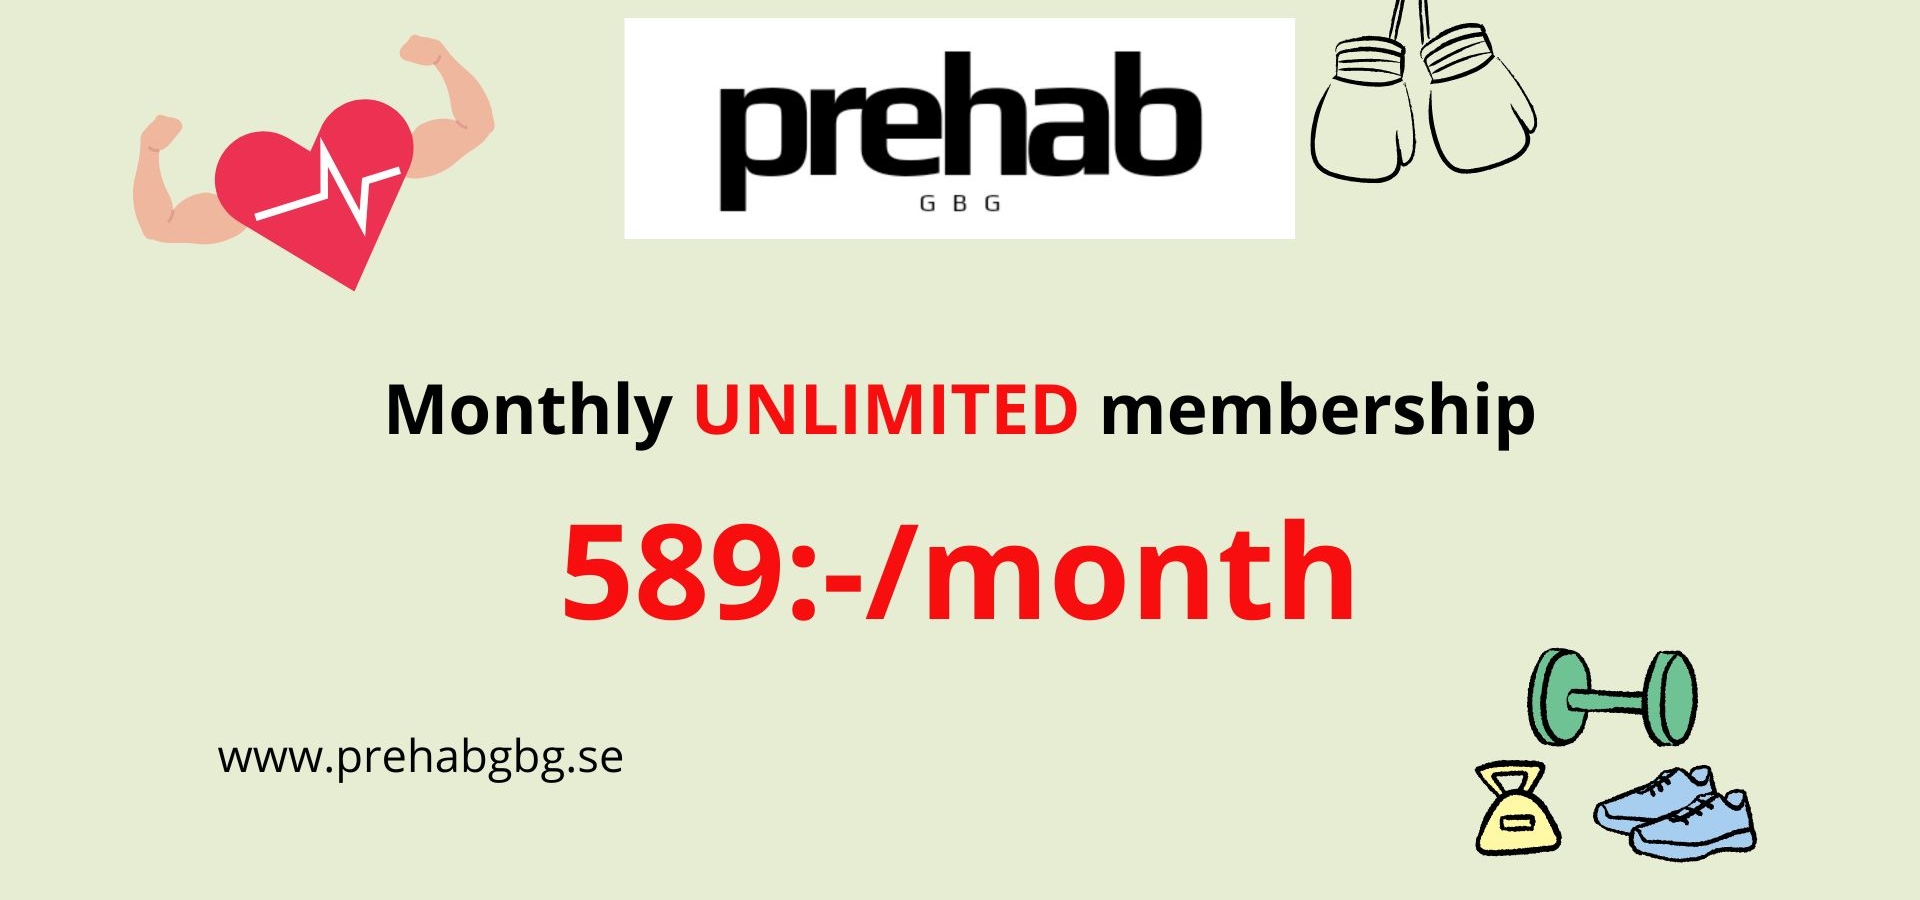 Monthly UNLIMITED membership